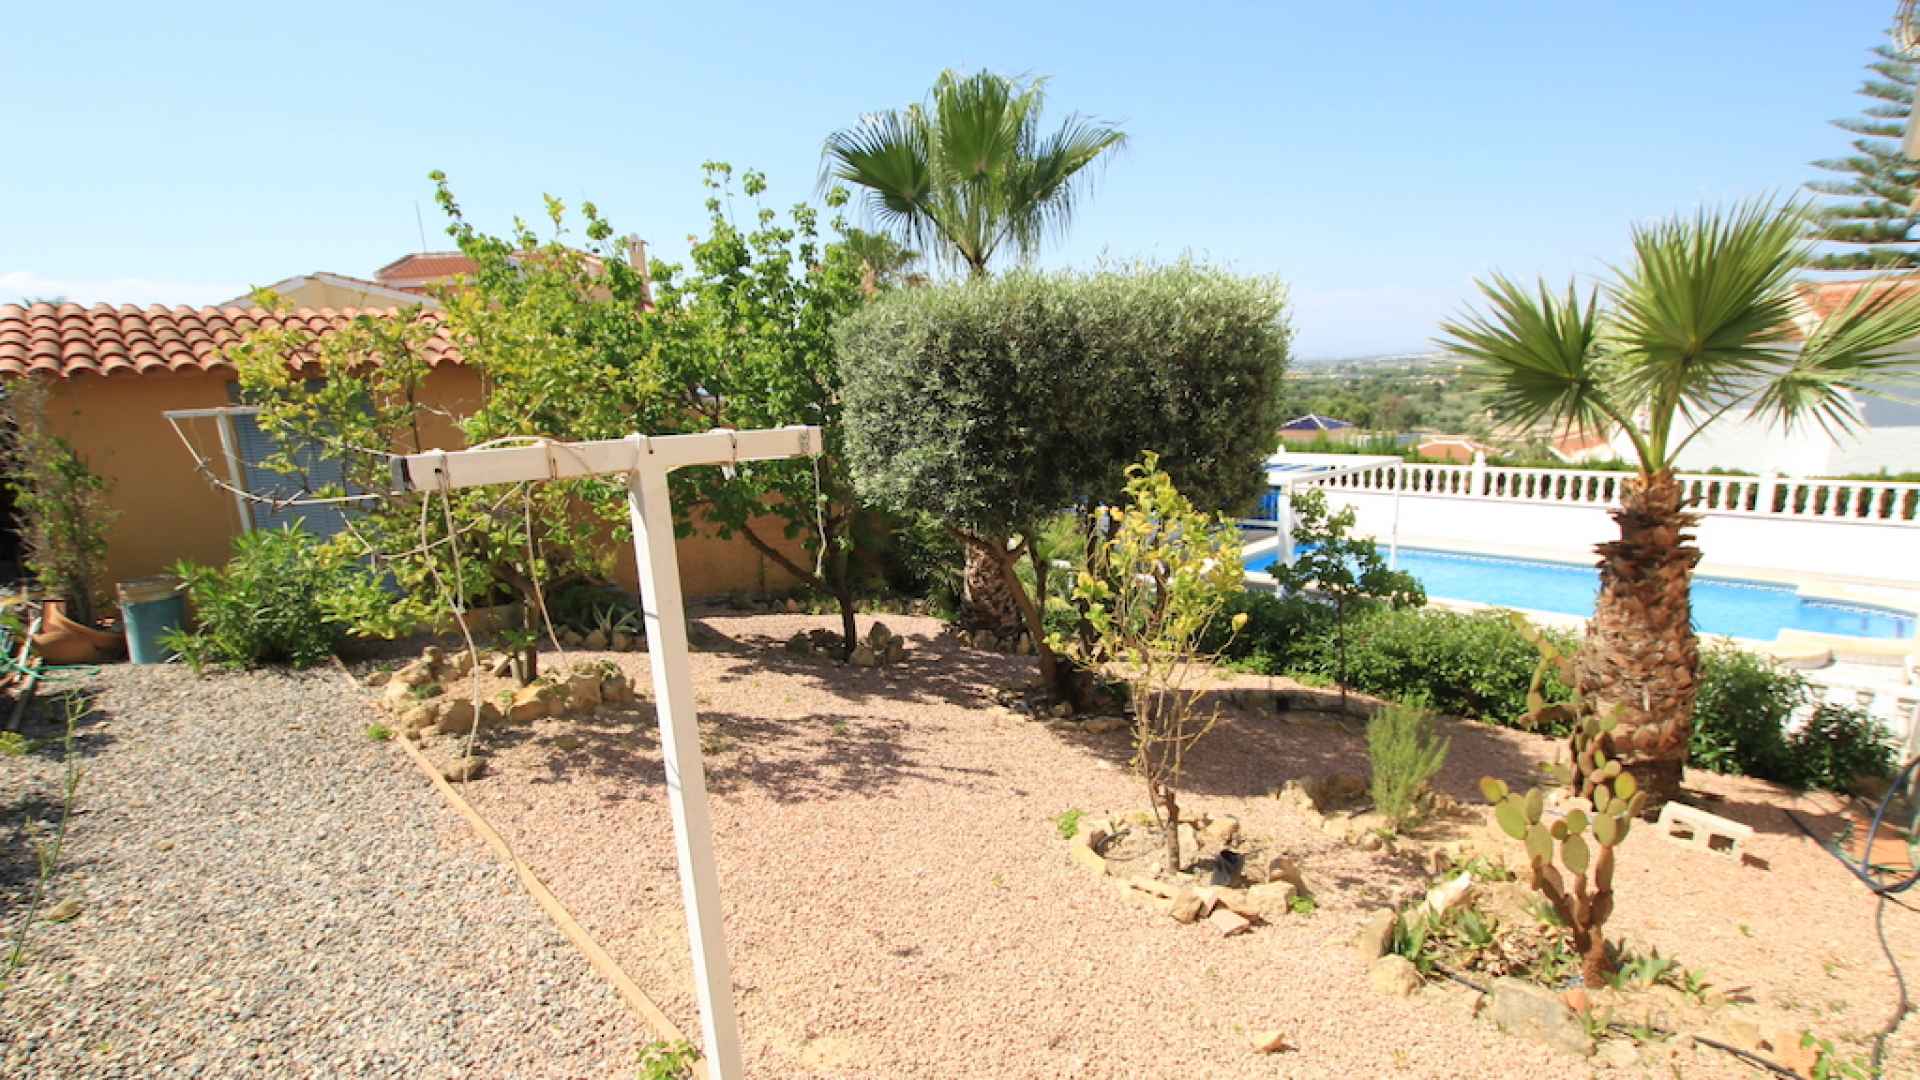 48133_spacious_210sqm_detached_villa_with_internal_garage___private_pool_260623093704_img_5865